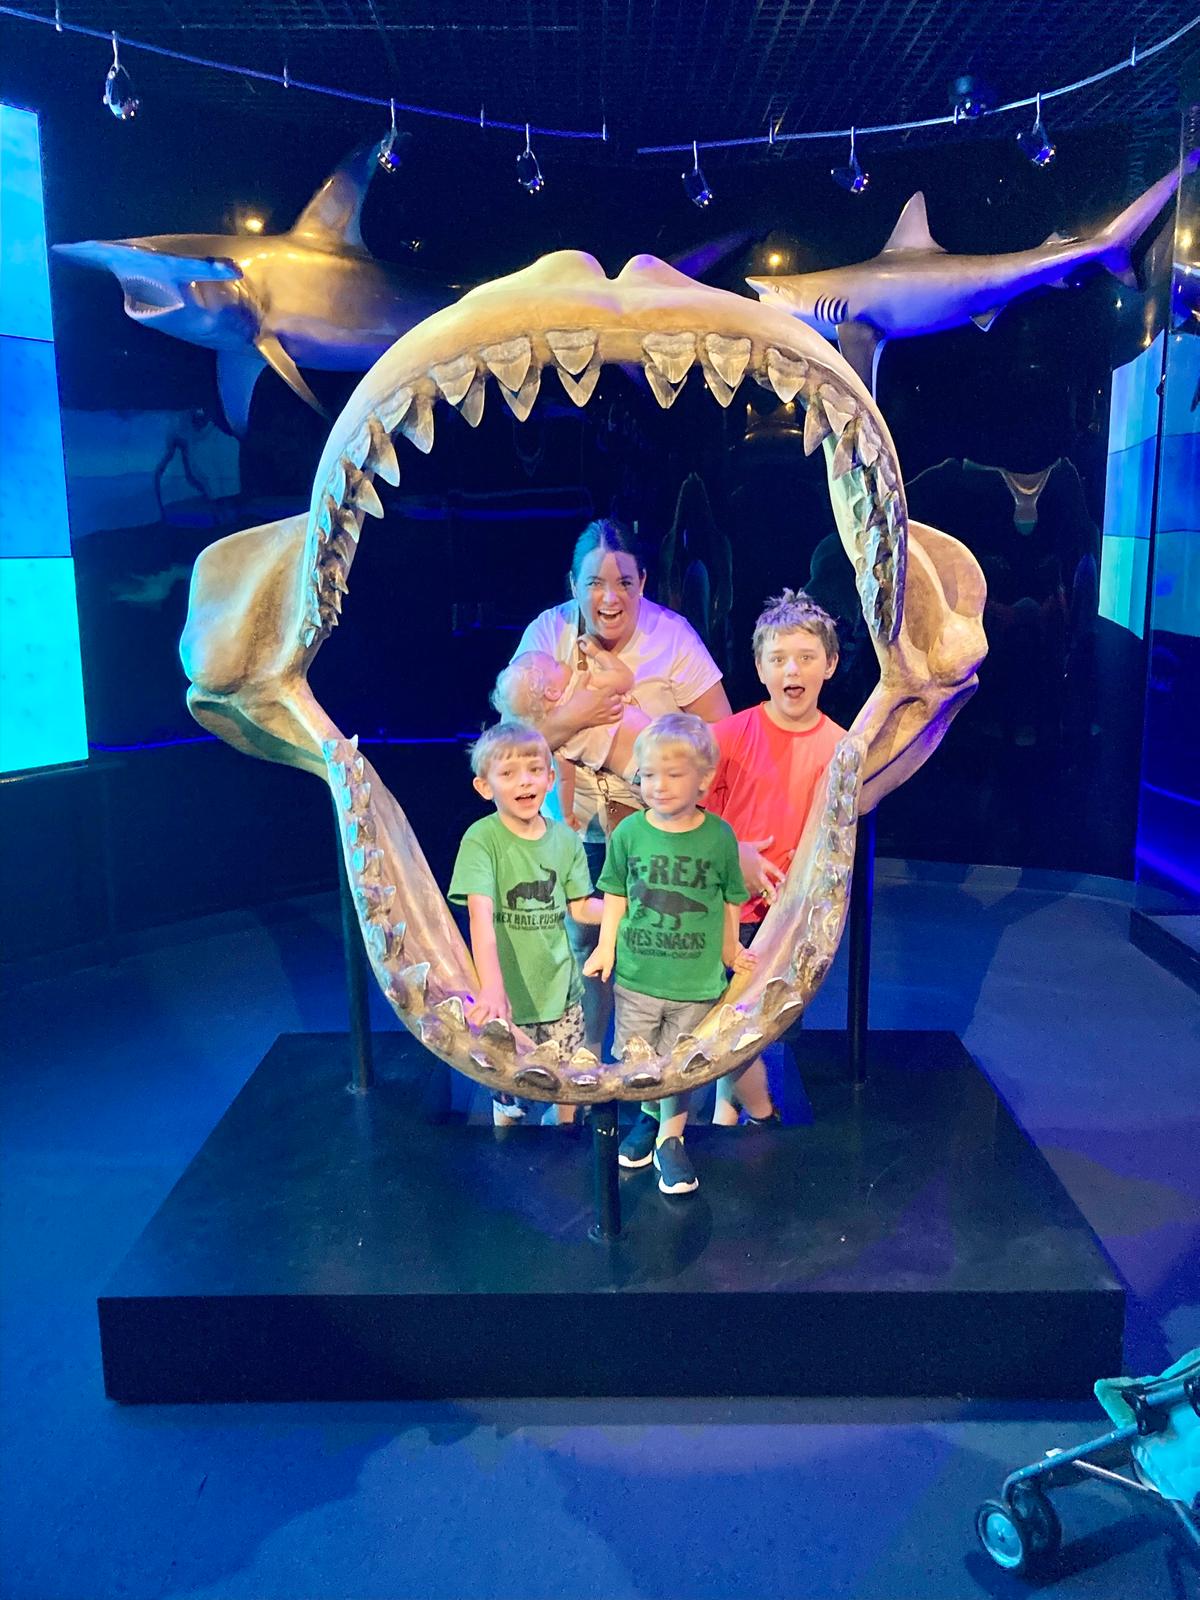 Visiting the Wonders of Wildlife National Museum & Aquarium in Springfield, Mo. (Colleen Carswell)